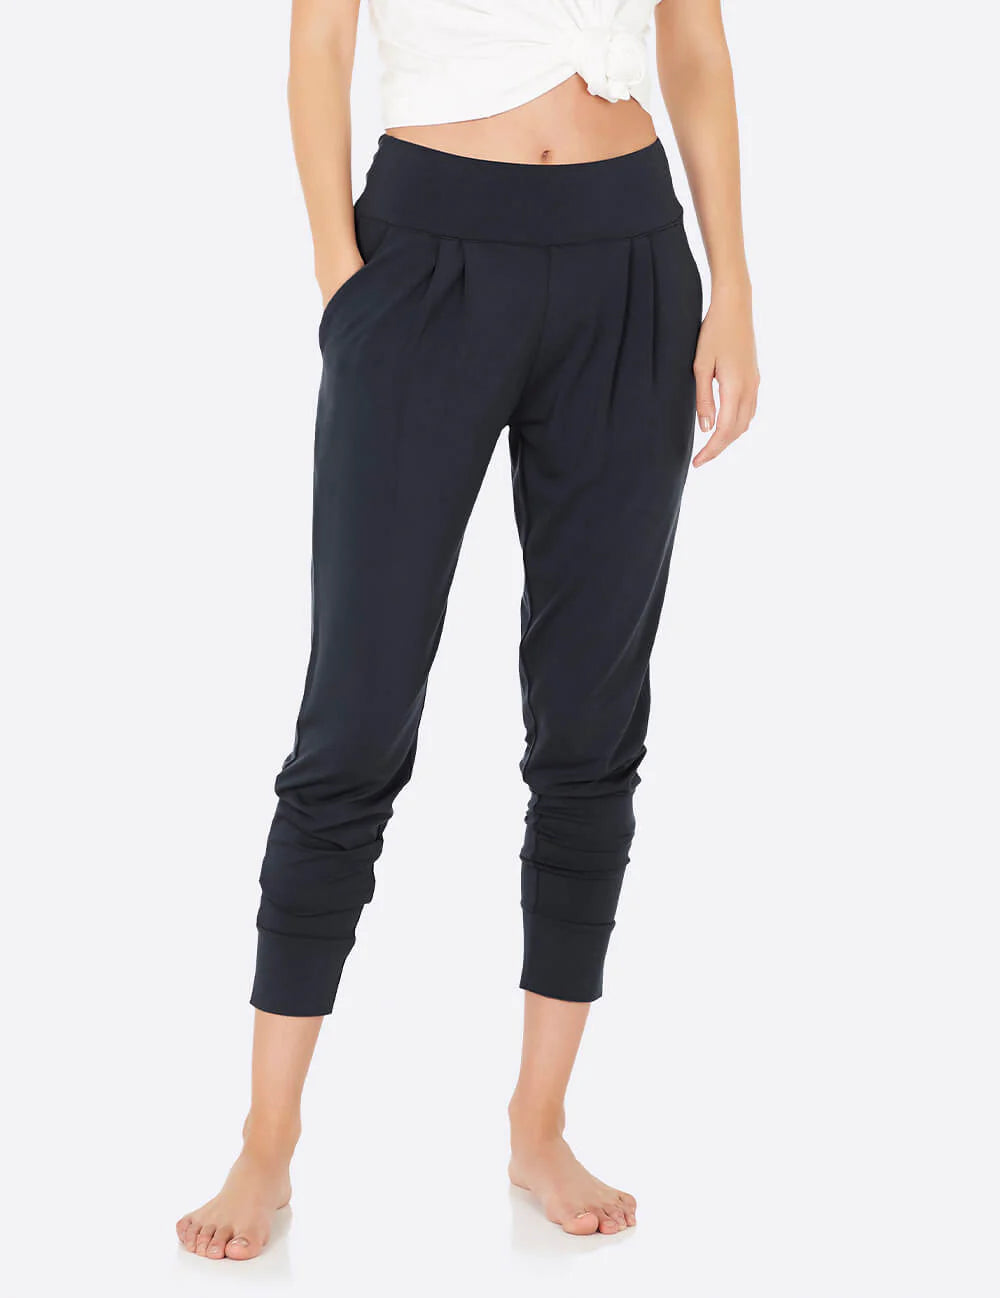 Downtime Lounge Pants, Storm